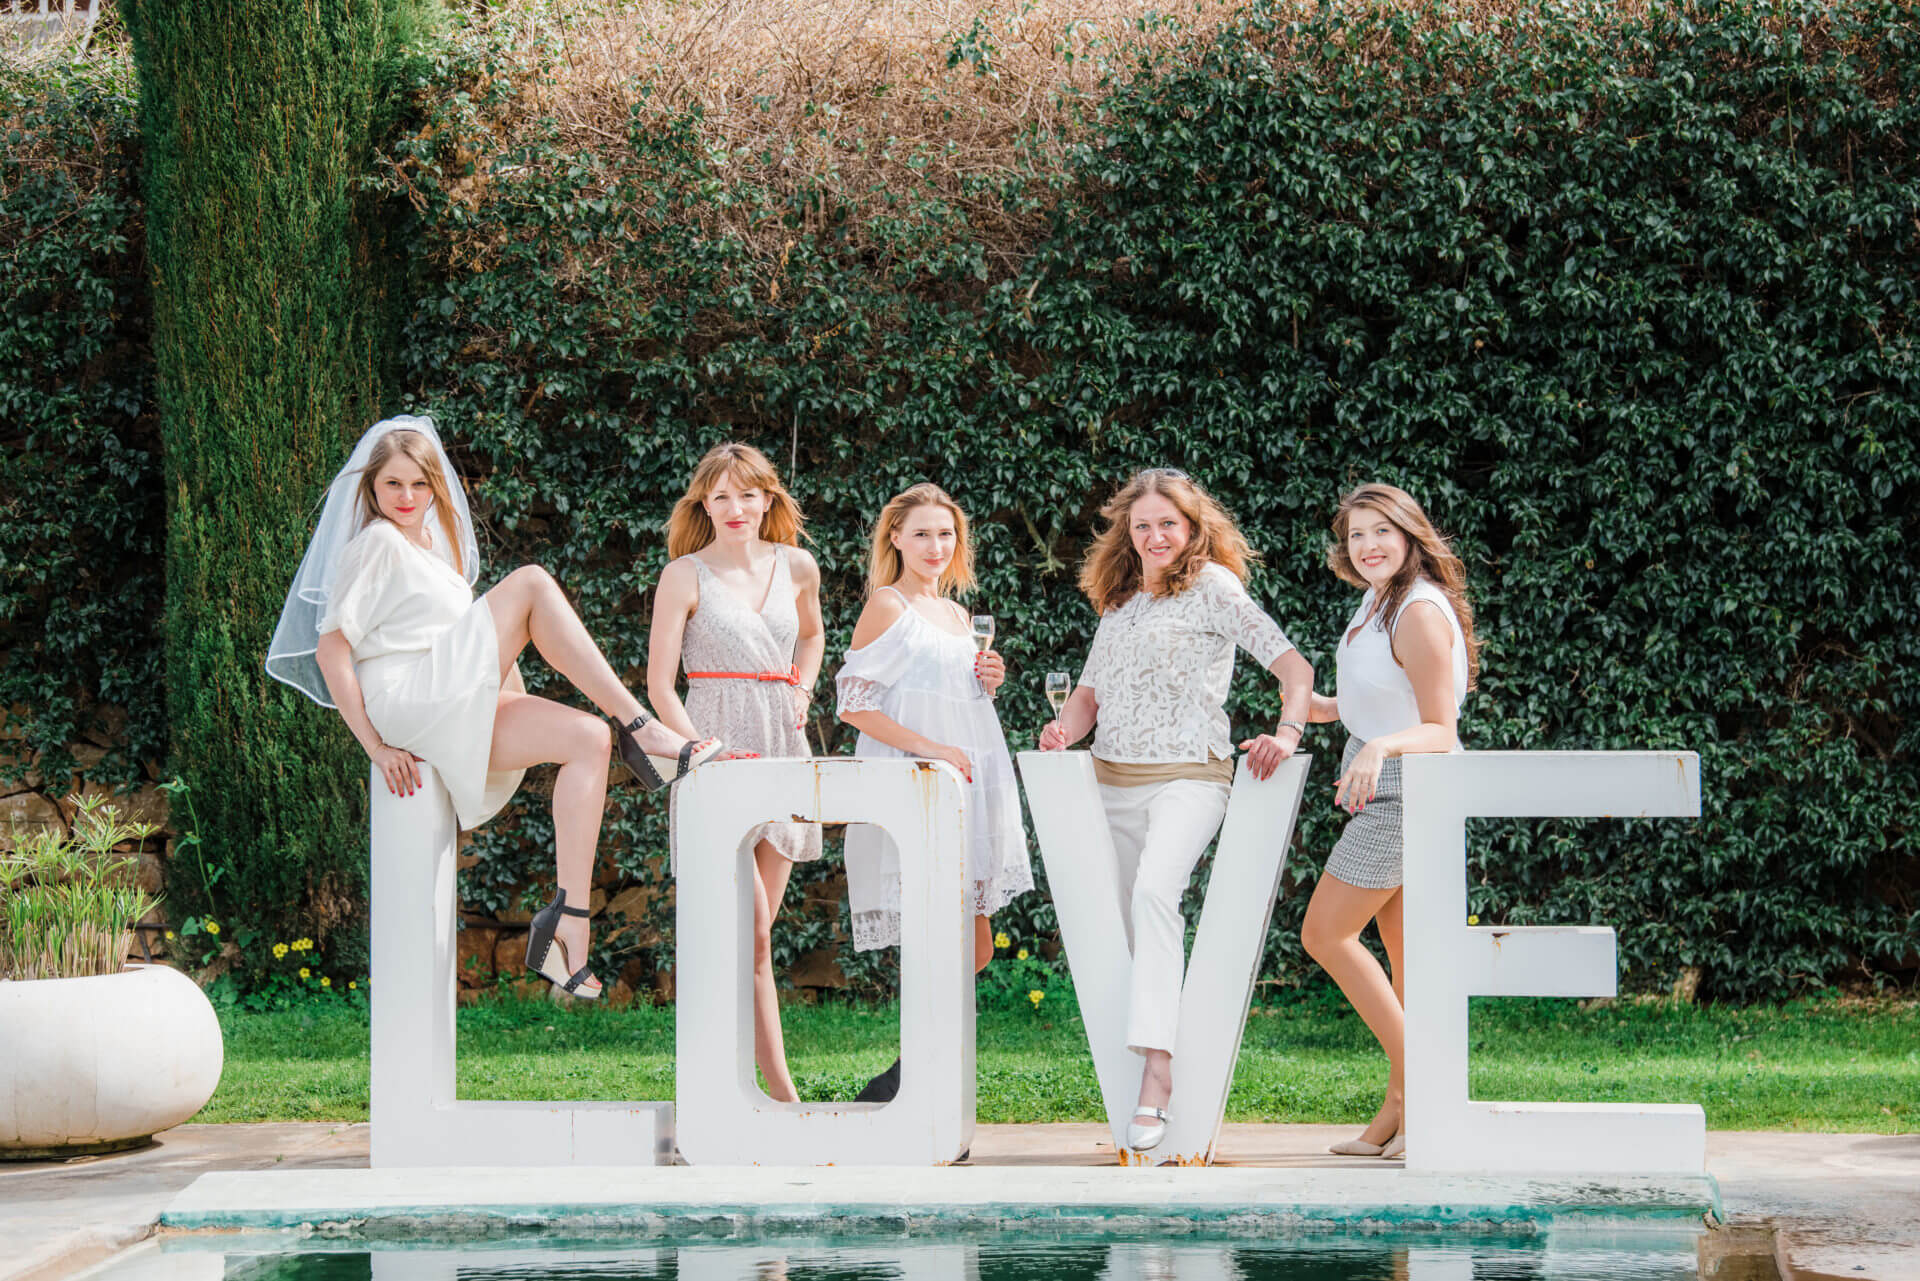 Bachelorette Party Photoshoot Ideas, Poses, & What to Wear